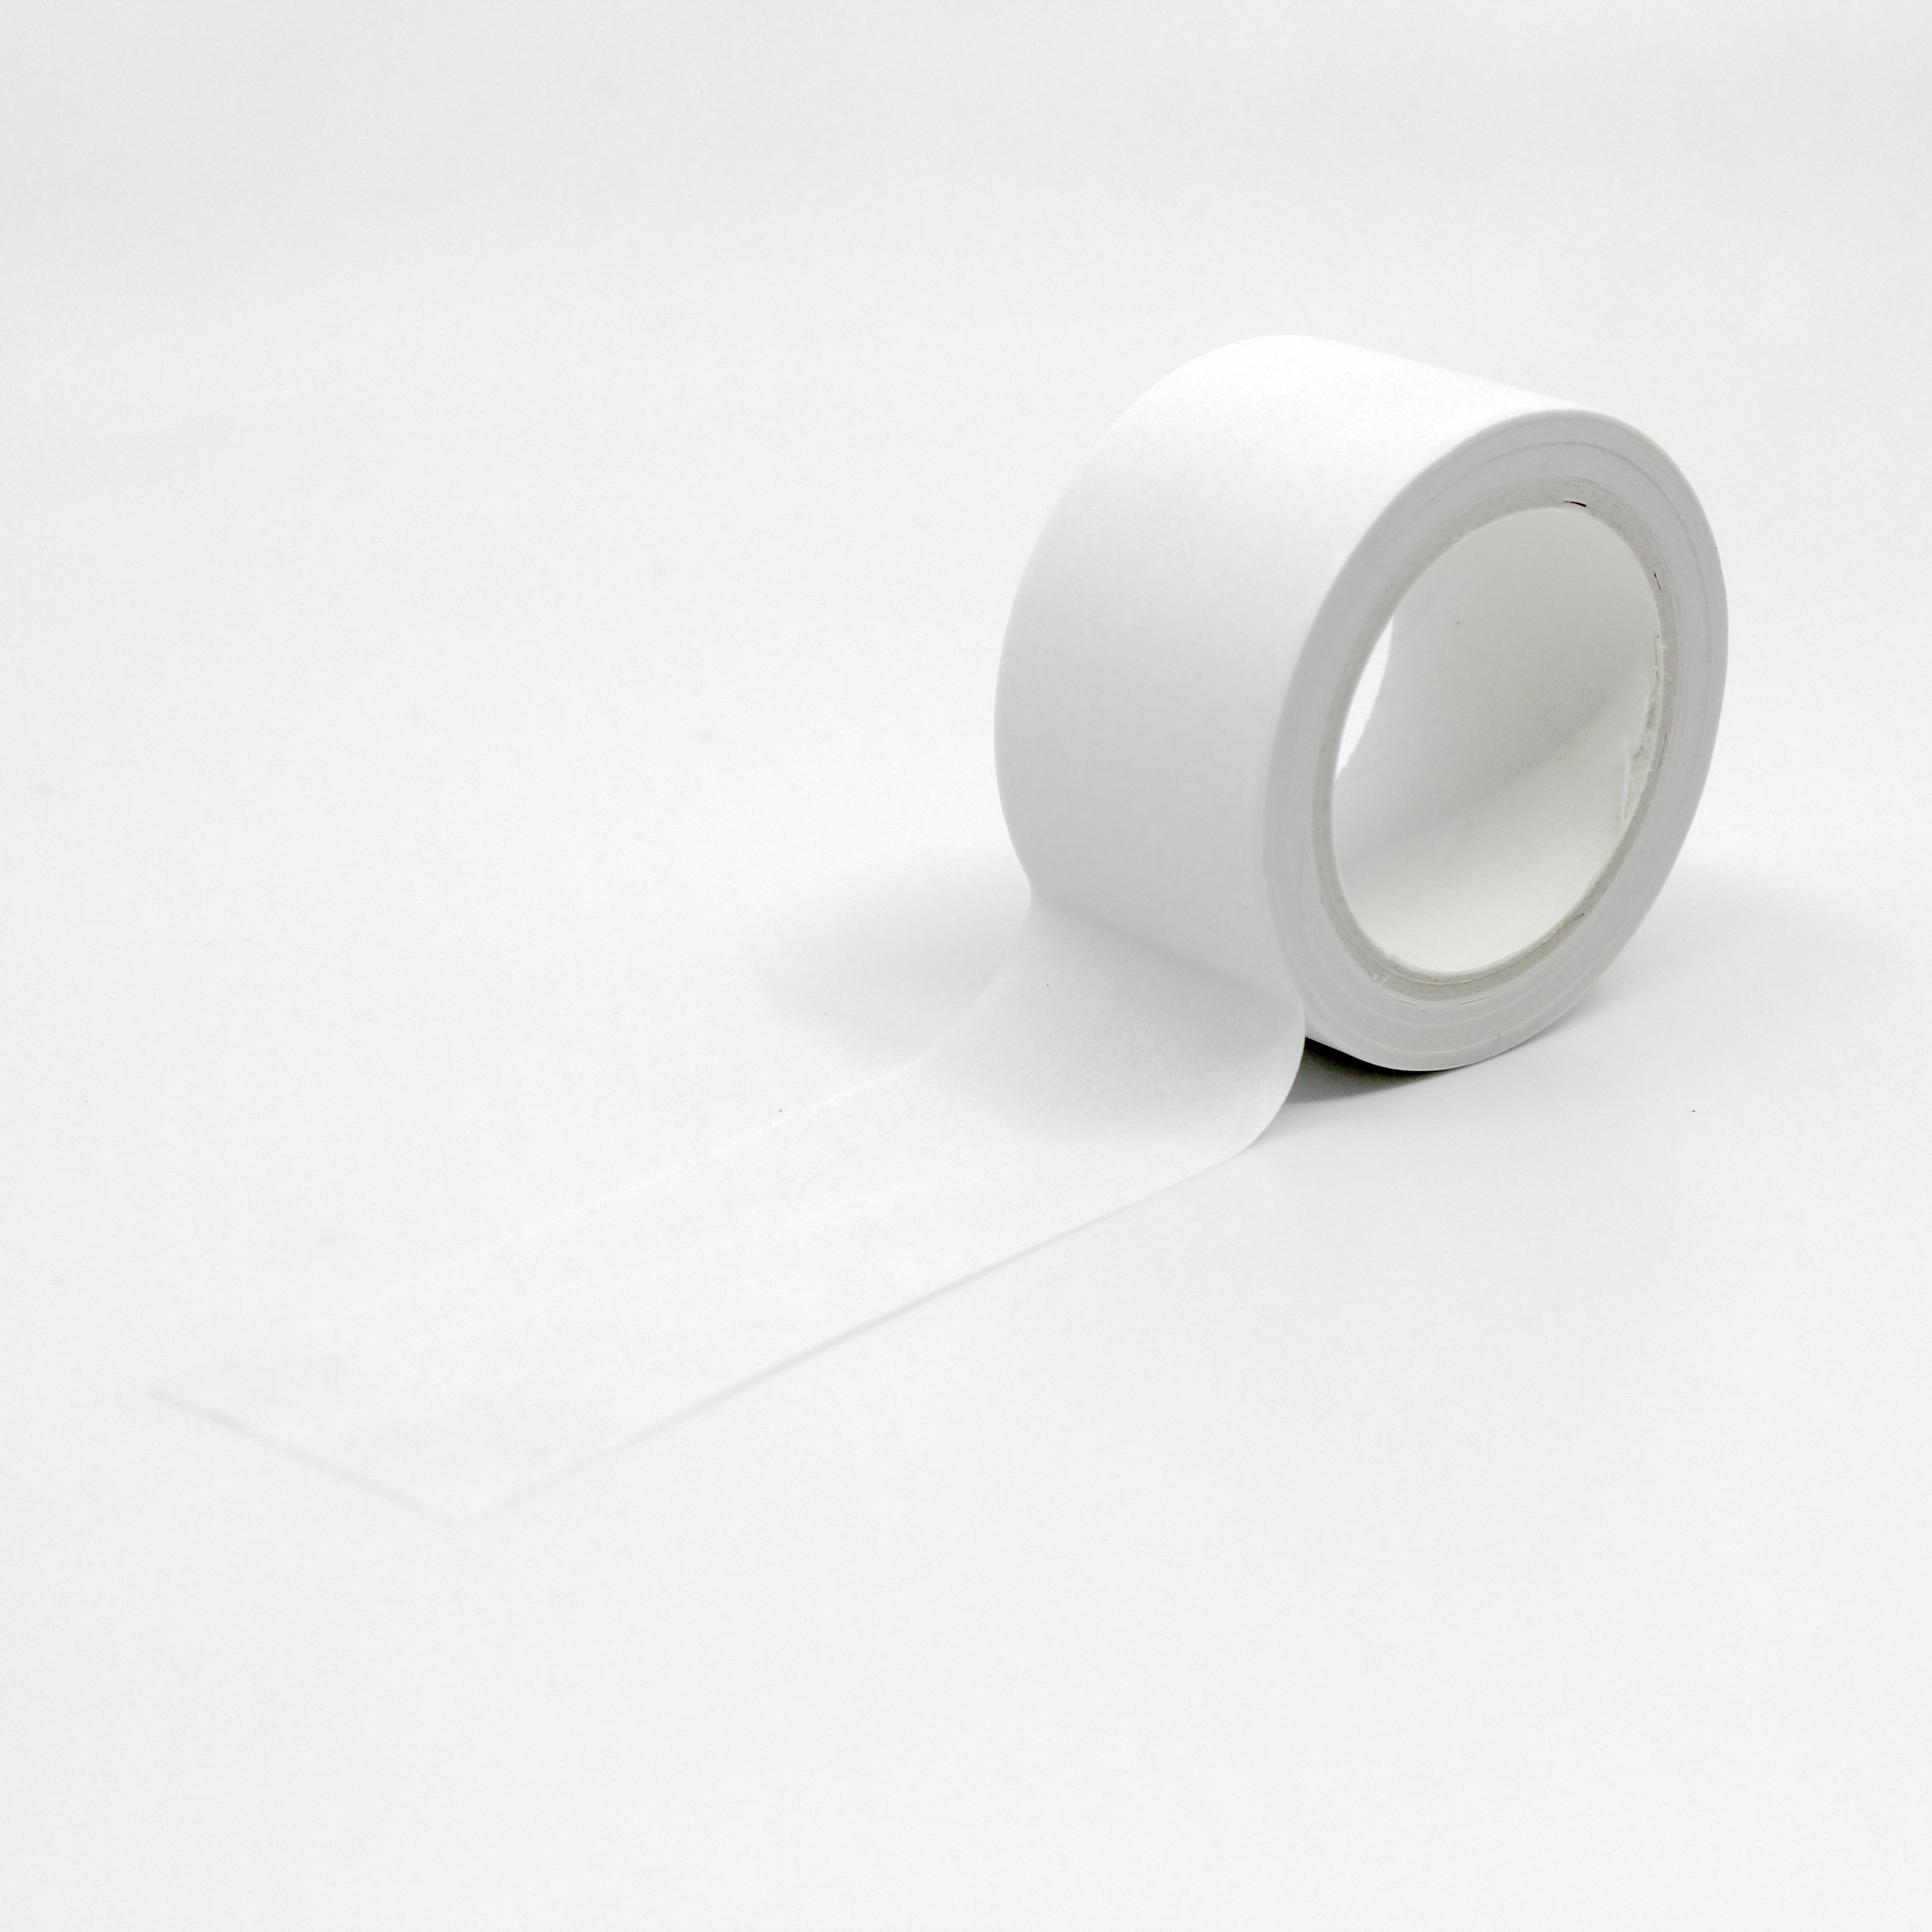 Enhance your crafts with our solid white washi tape, featuring a clean and minimalist design in a classic white hue, perfect for adding a versatile and elegant touch to your projects. This tape is sold exclusively at BBB Supplies Craft Shop.